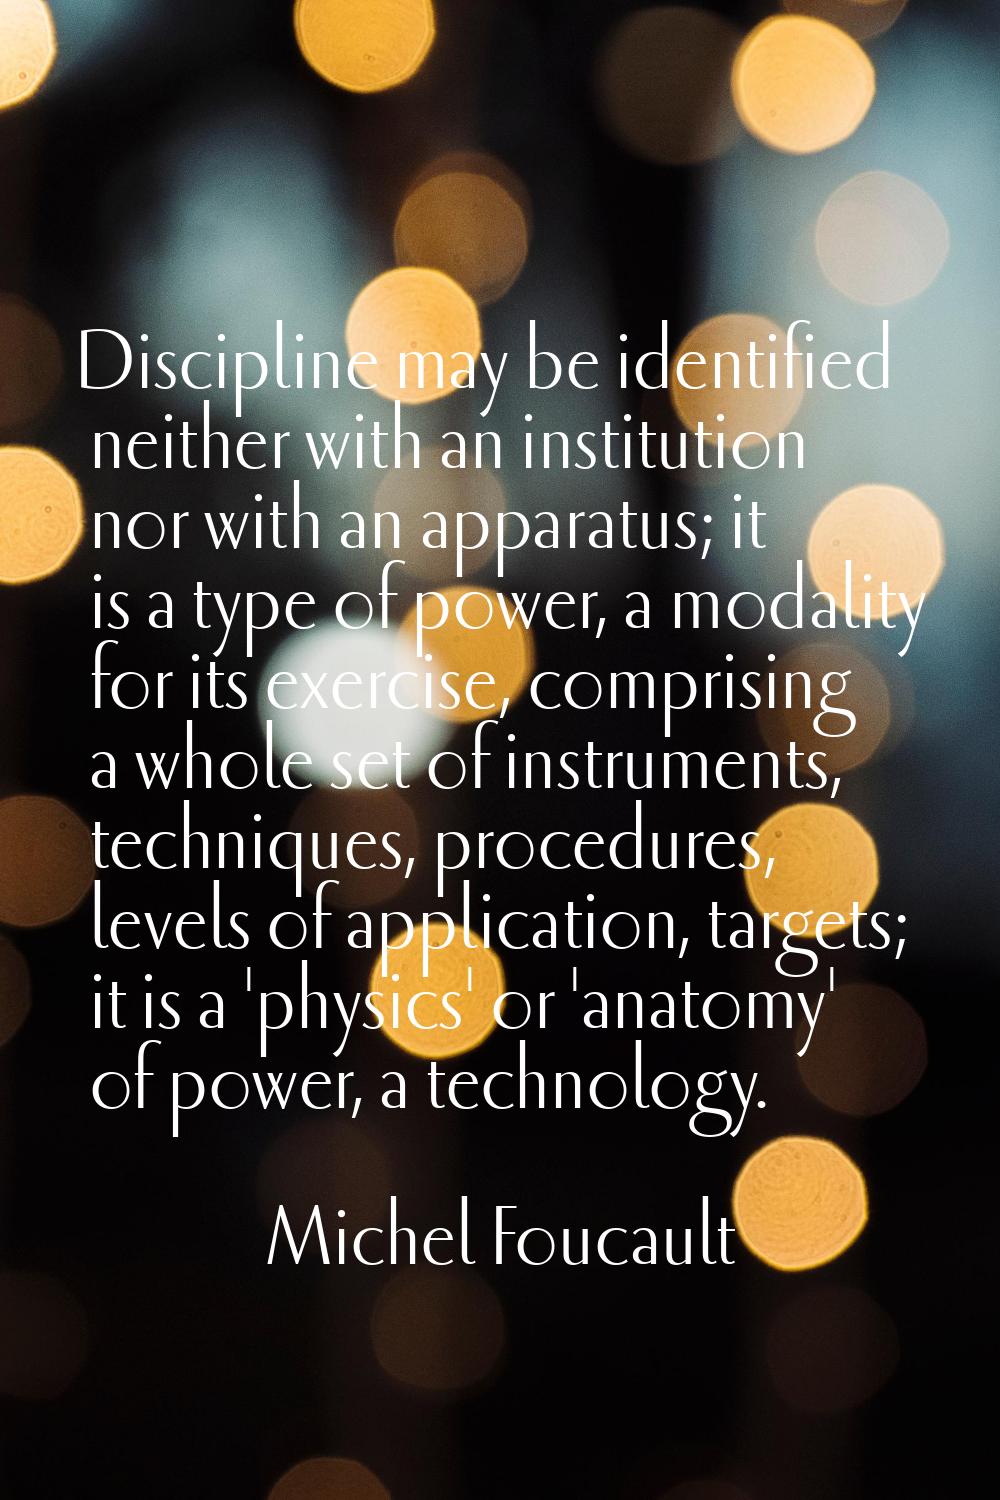 Discipline may be identified neither with an institution nor with an apparatus; it is a type of pow